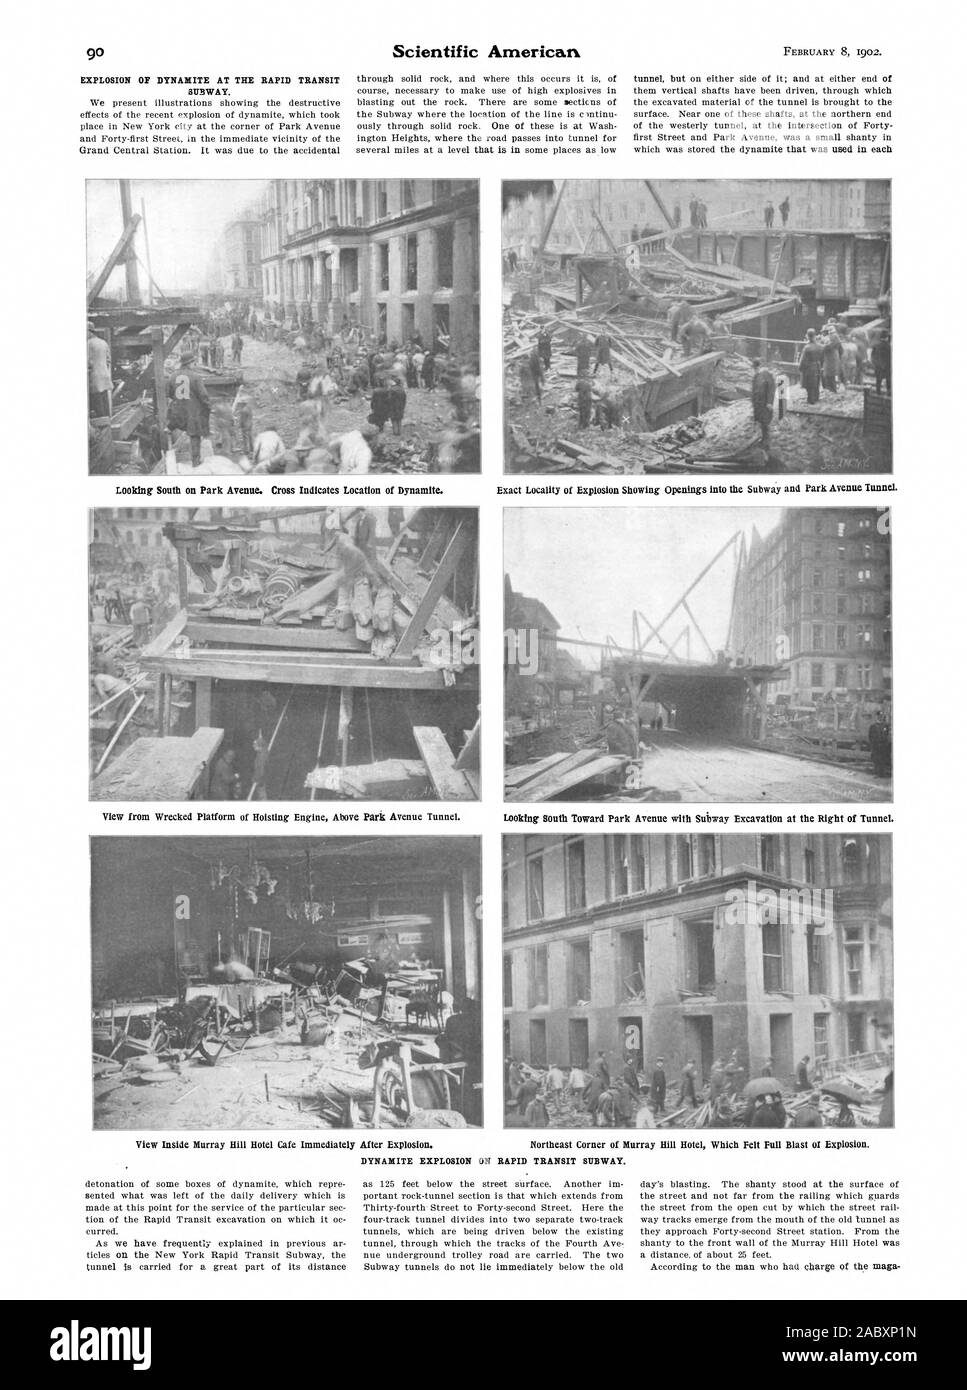 EXPLOSION OF DYNAMITE AT THE RAPID TRANSIT SUBWAY. Looking South on Park Avenue. Cross Indicates Location of Dynamite. DYNAMITE EXPLOSION ON RAPID TRANSIT SUBWAY., scientific american, 1902-02-08 Stock Photo